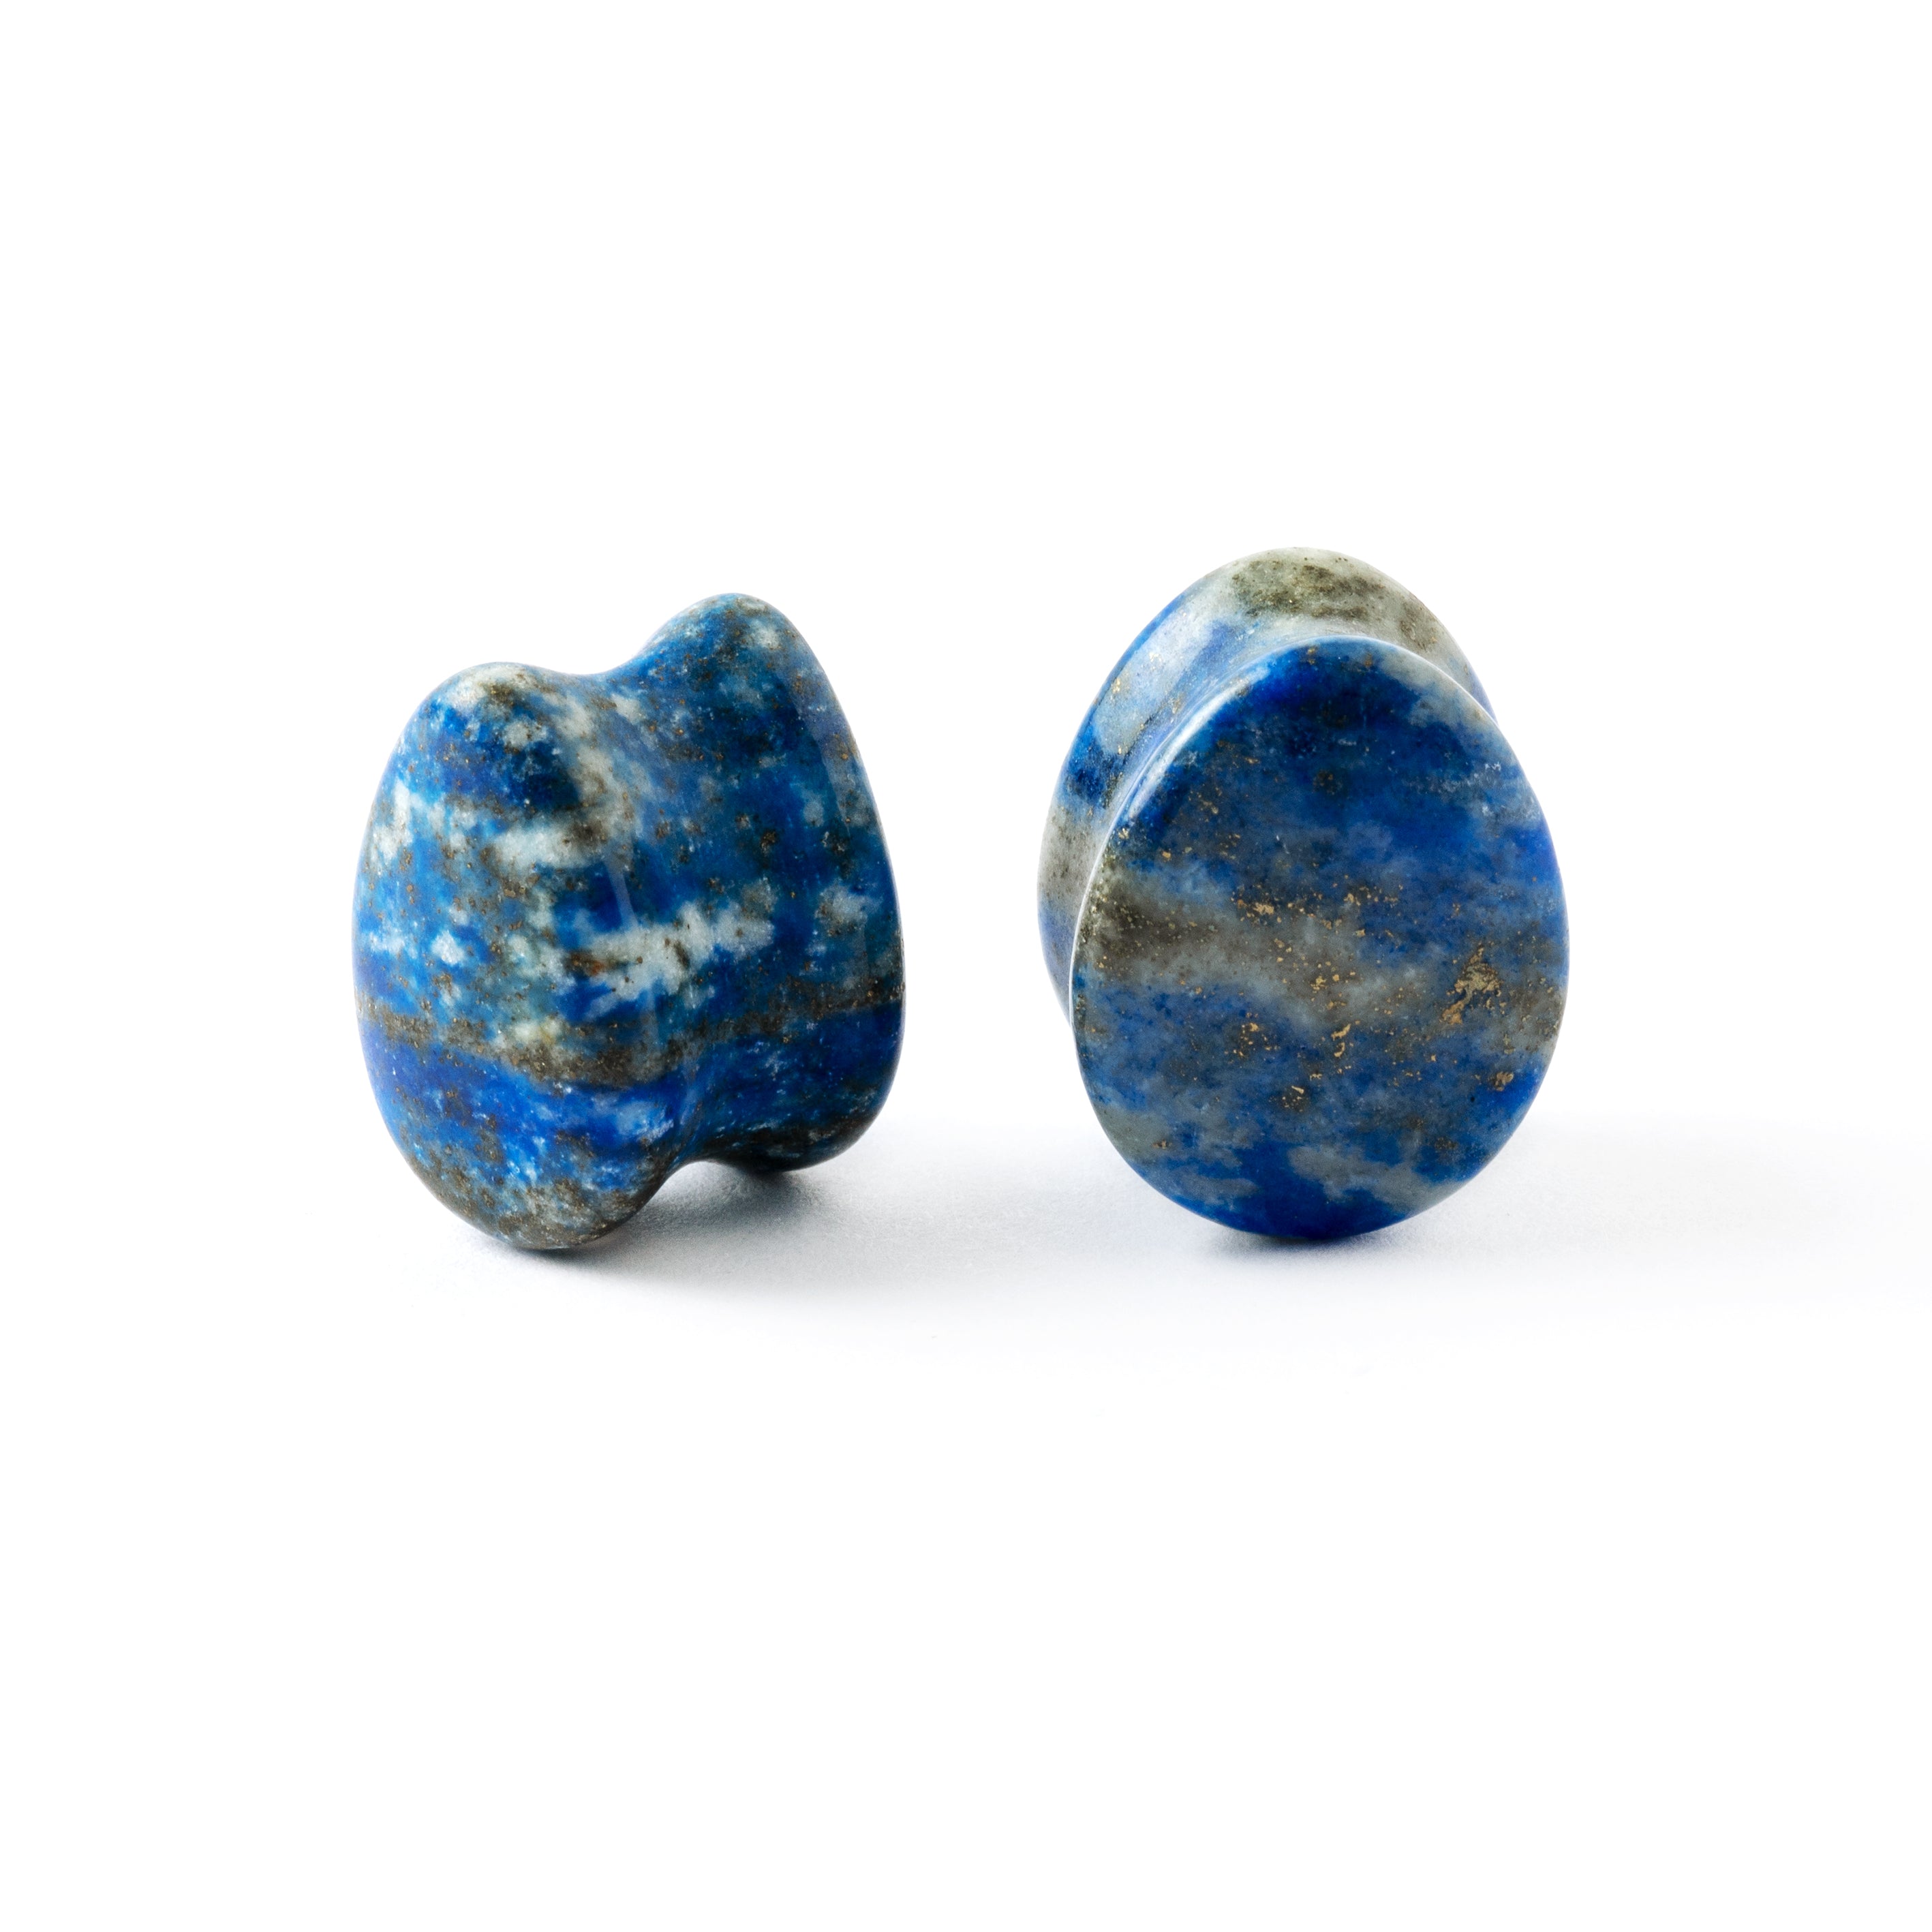 Lapis Lazuli teardrop plugs front and side view